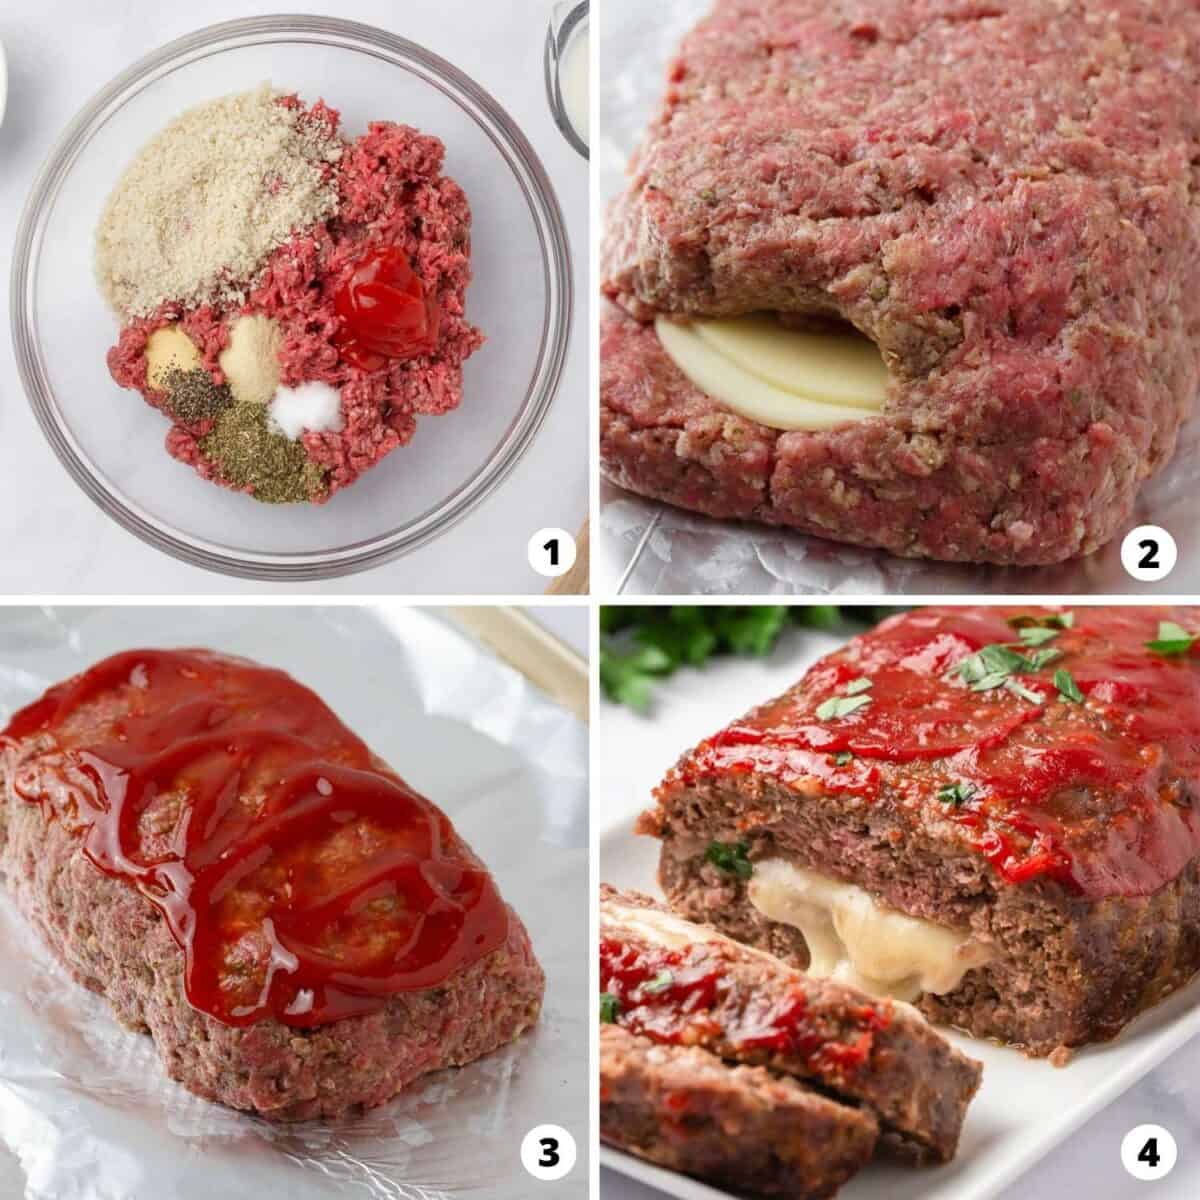 Showing how to make stuffed meatloaf.